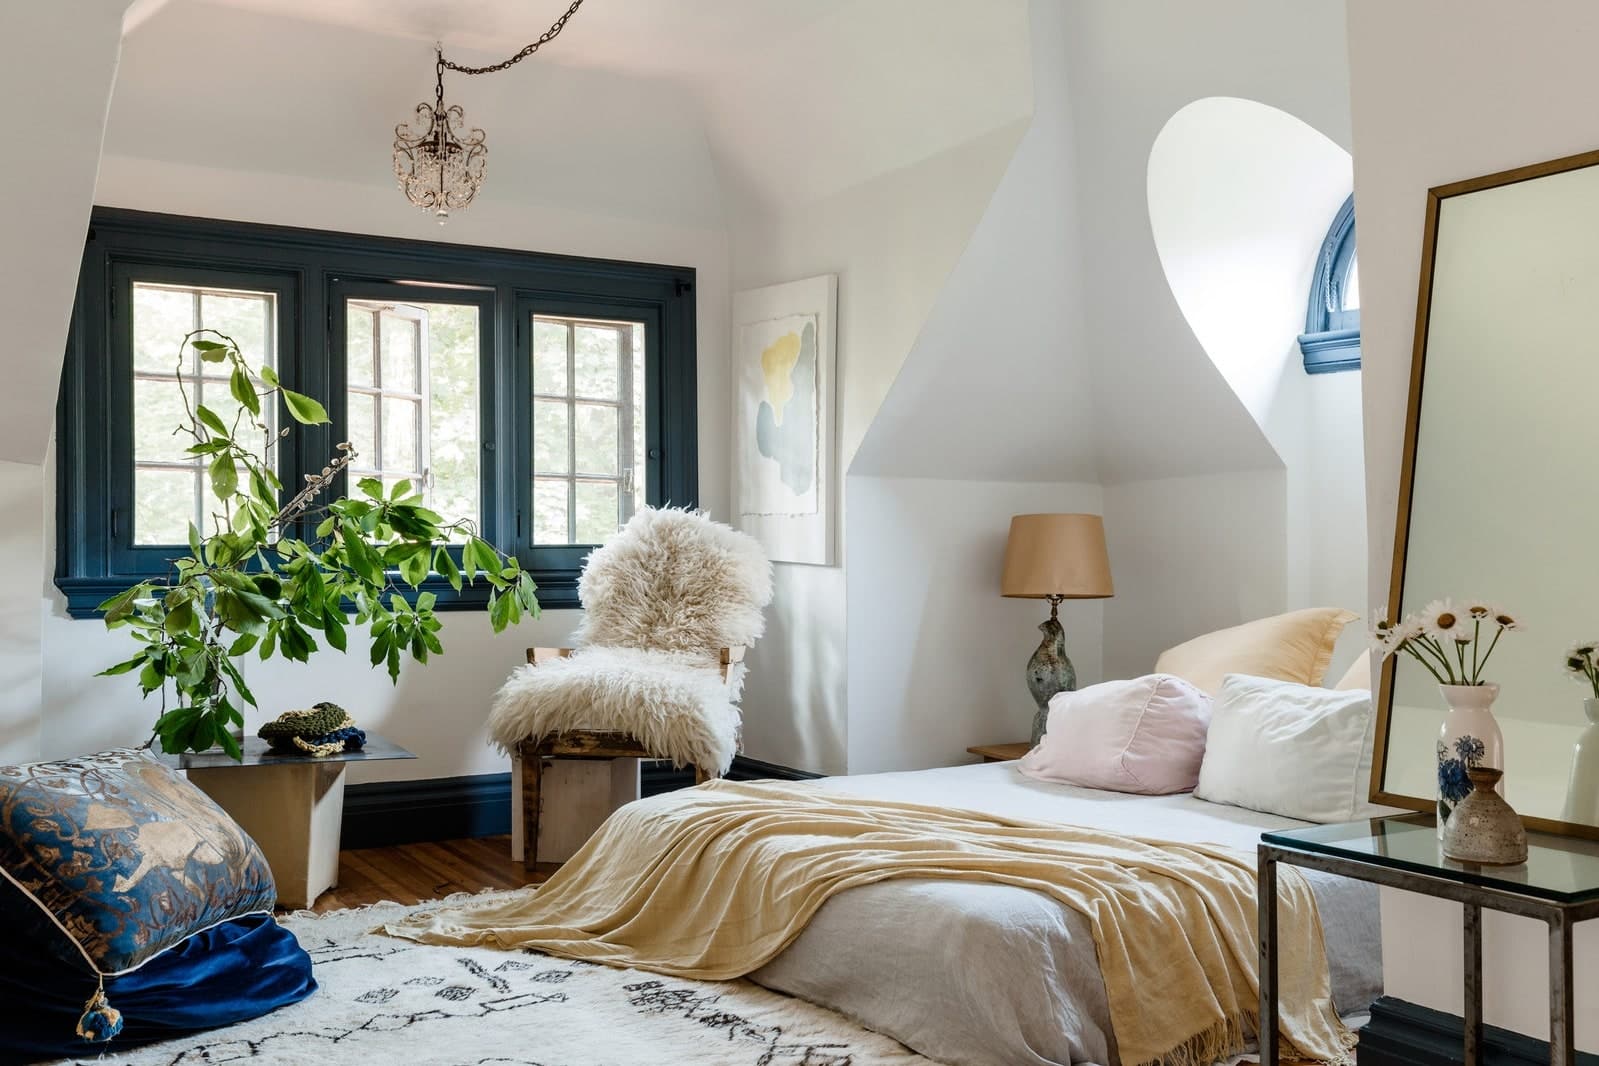 The bright, richly decorated bedroom of an AirBnB with white walls, dark wood floors, decorative rug, and exotic plant.